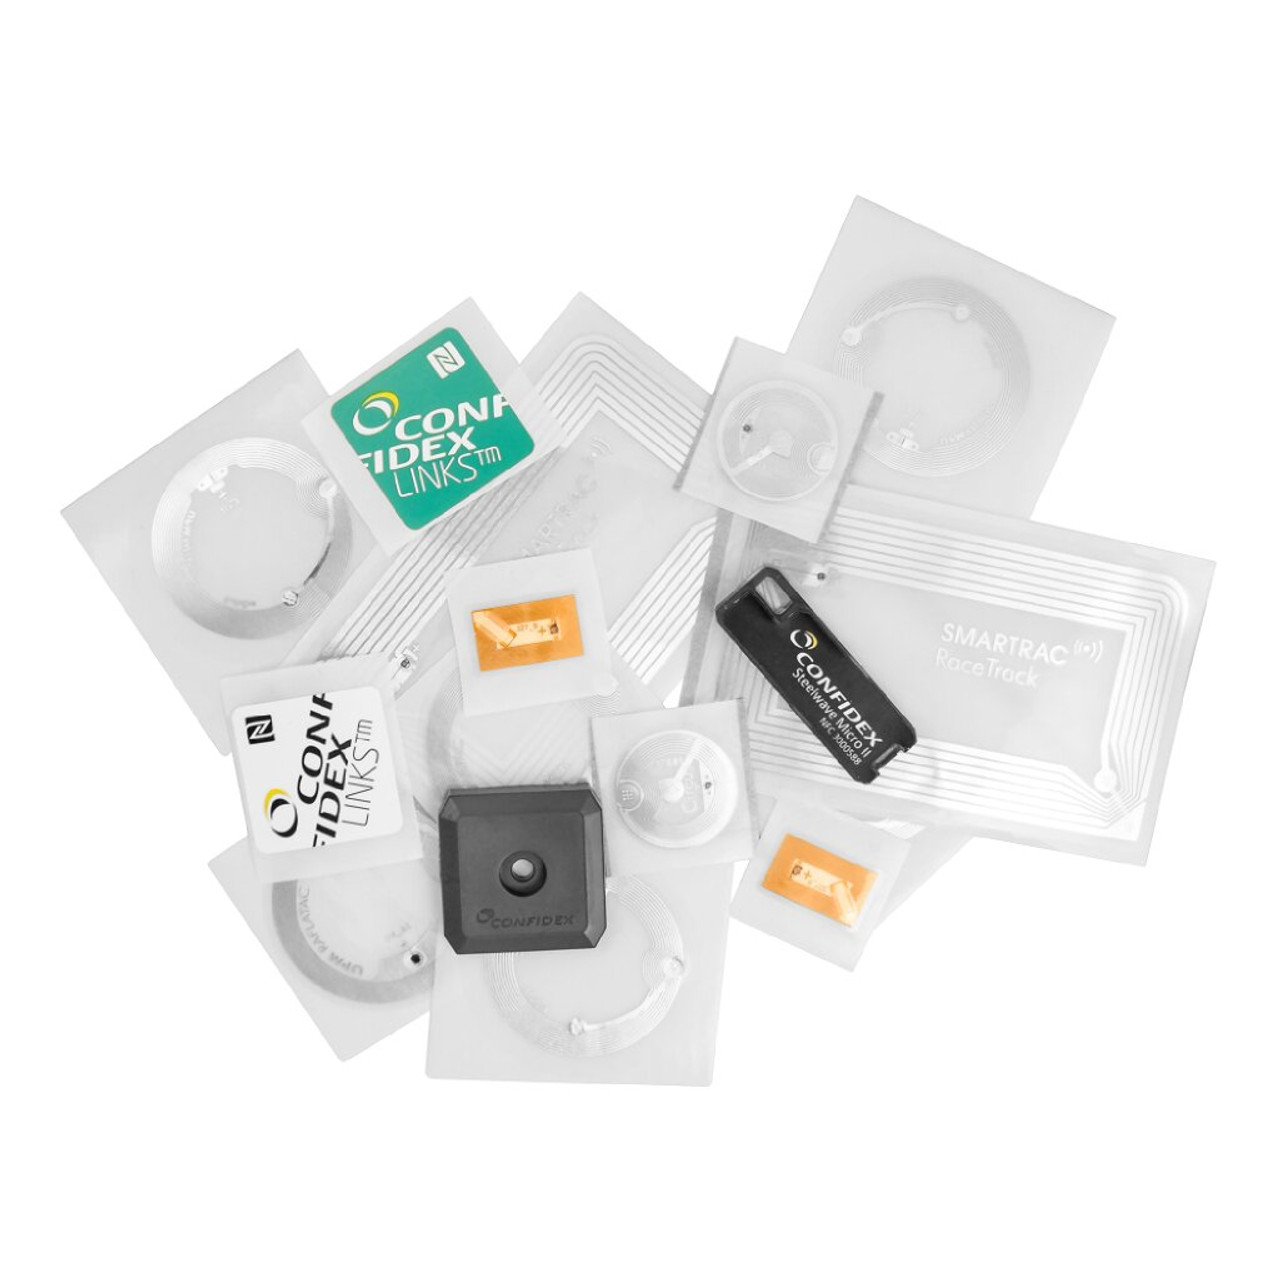 Buy NFC Tags, UHF RFID Tags, Barcodes and Hardware for Connected